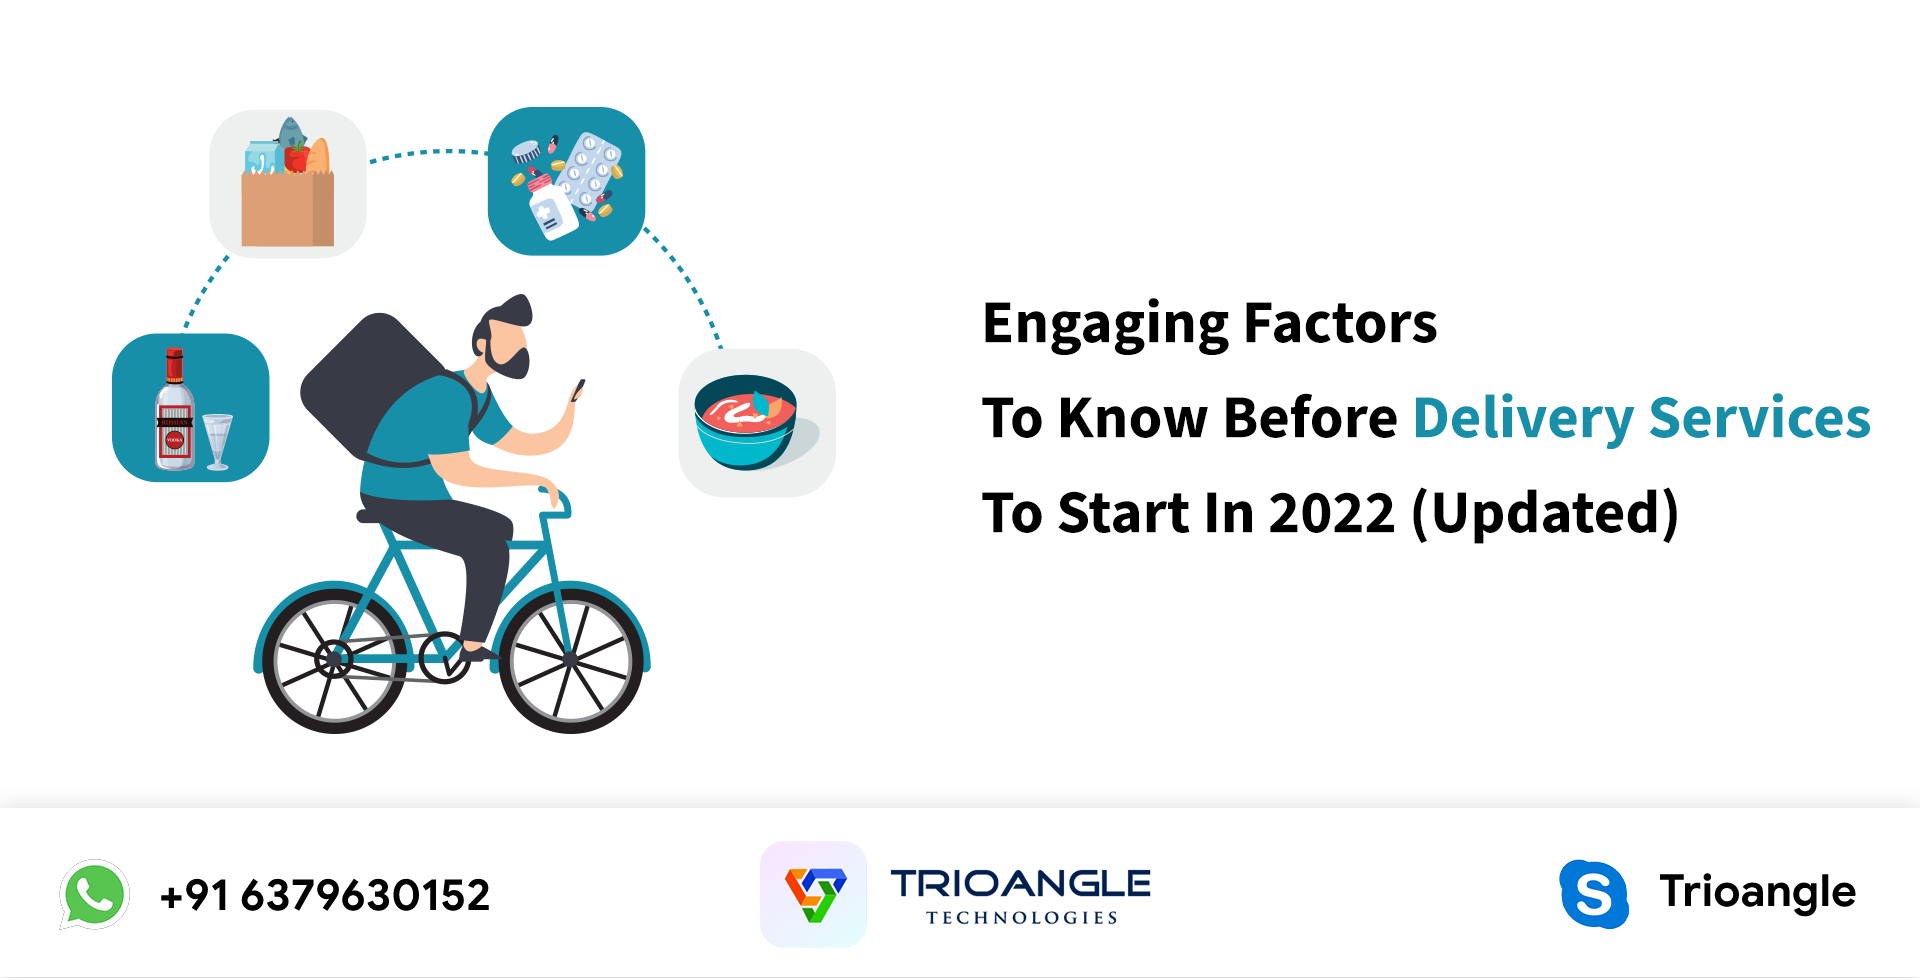 Engaging Factors To Know Before Delivery Services To Start In 2022 (Updated)